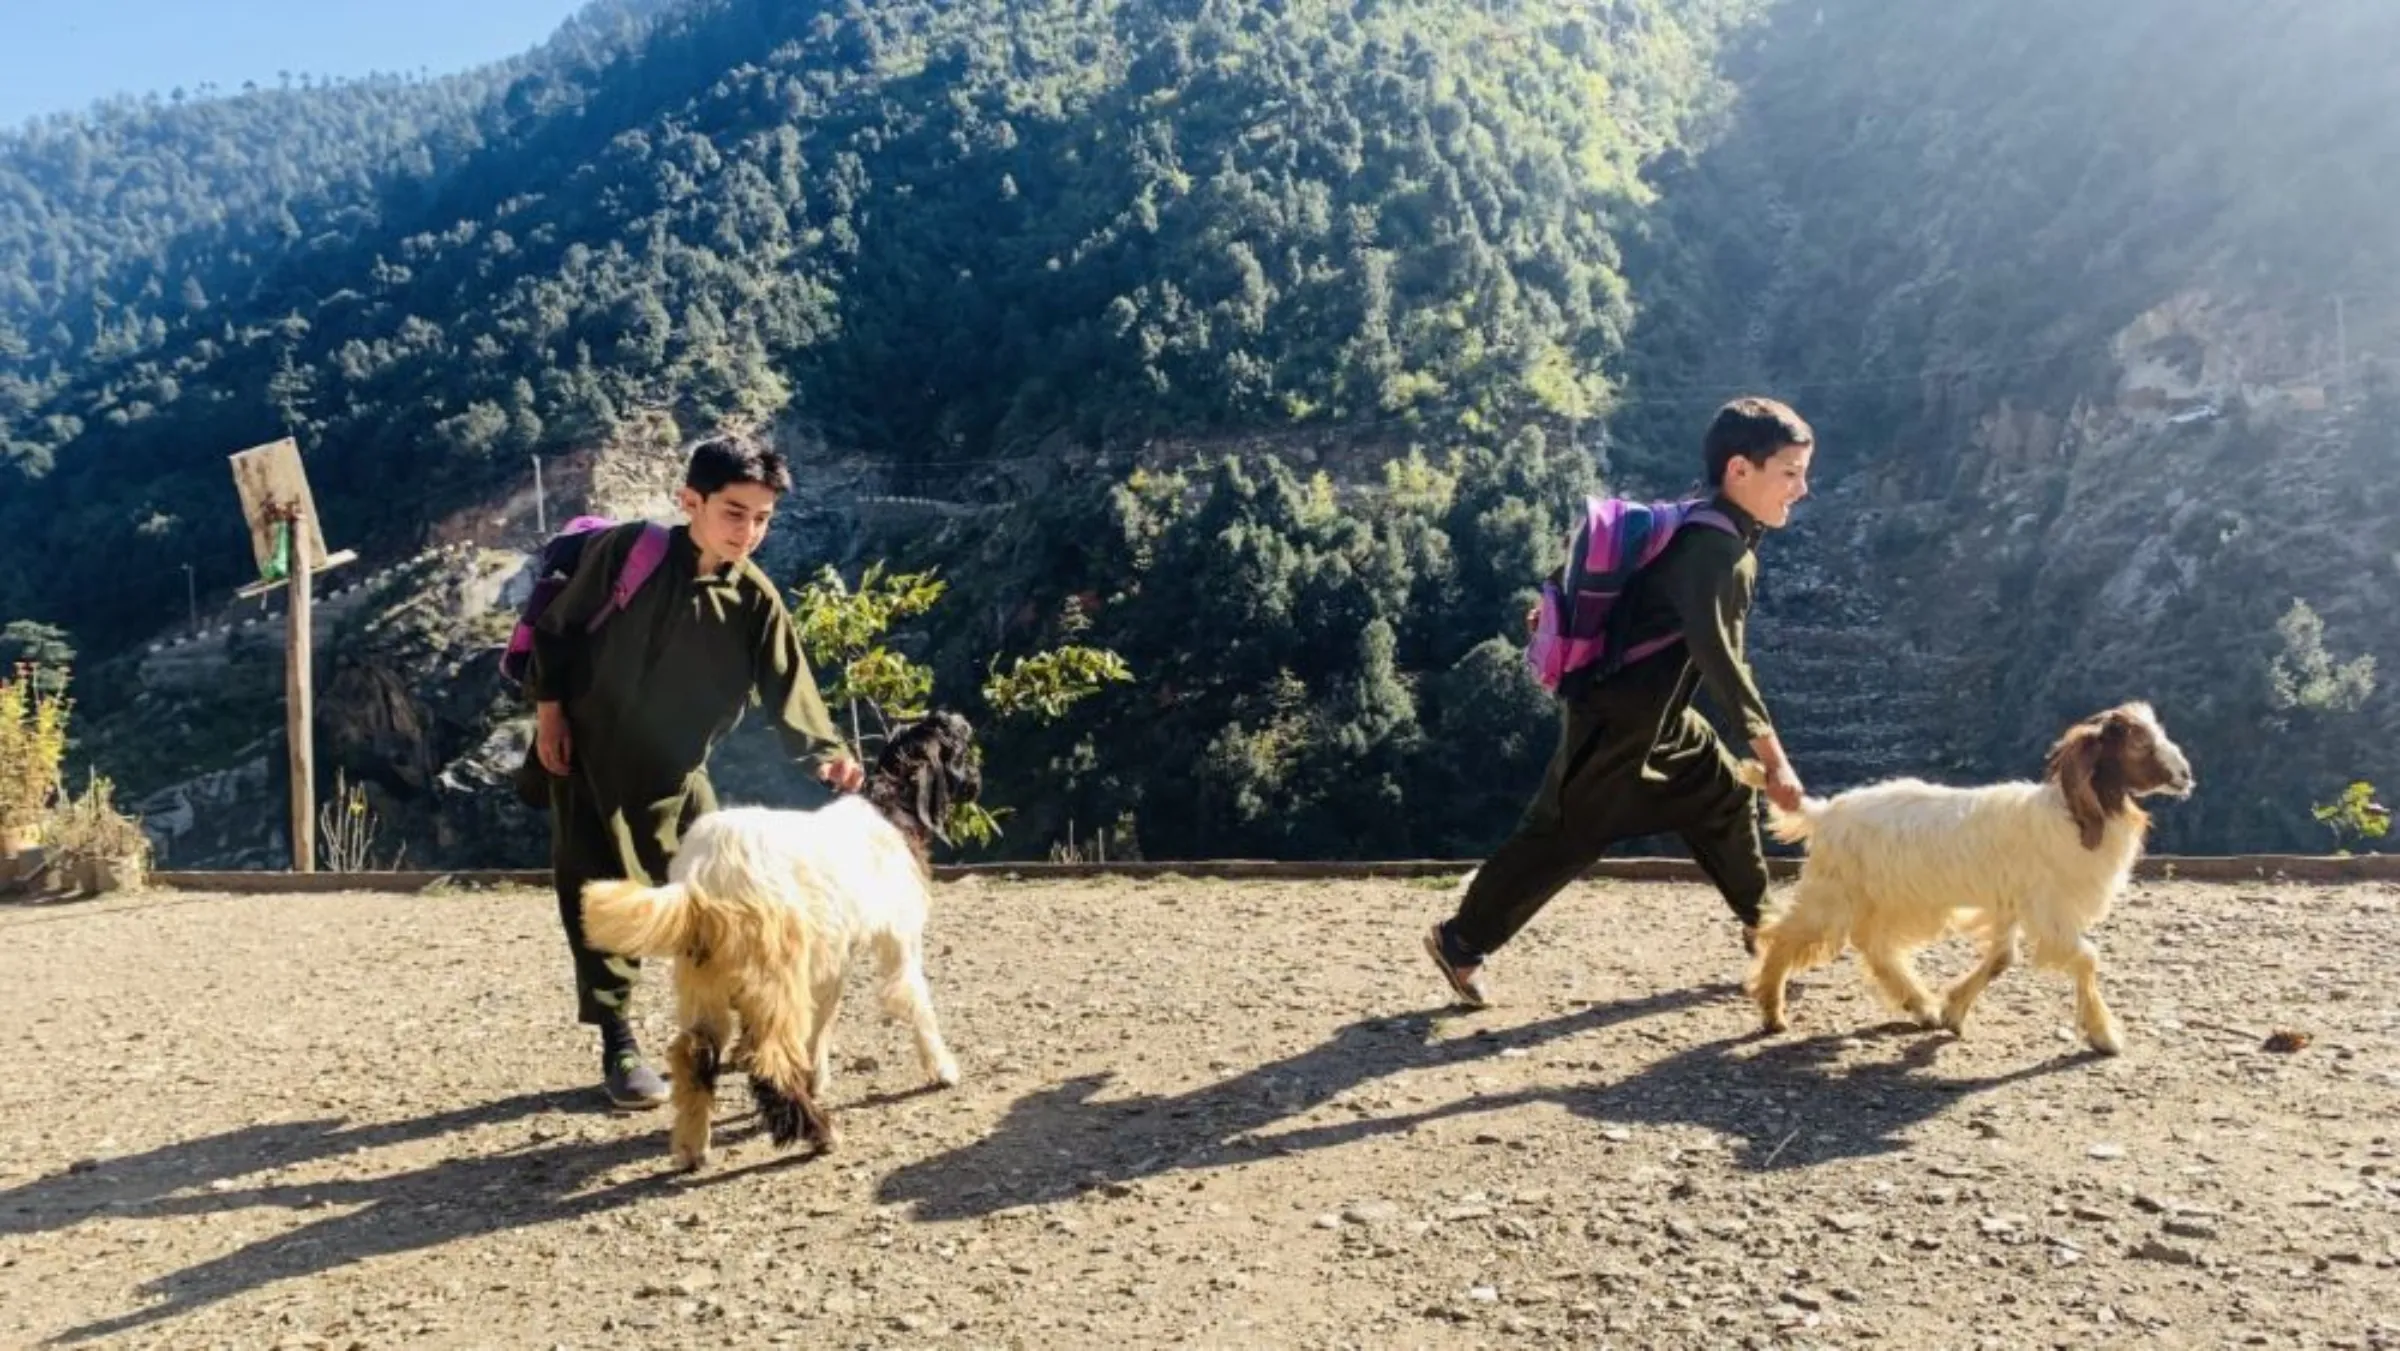 Two siblings play with goats in the yard of their house after school in Lagan Khar, a village in Swat district in Pakistan’s northwest Khyber Pakhtunkhwa province, October 24, 2022